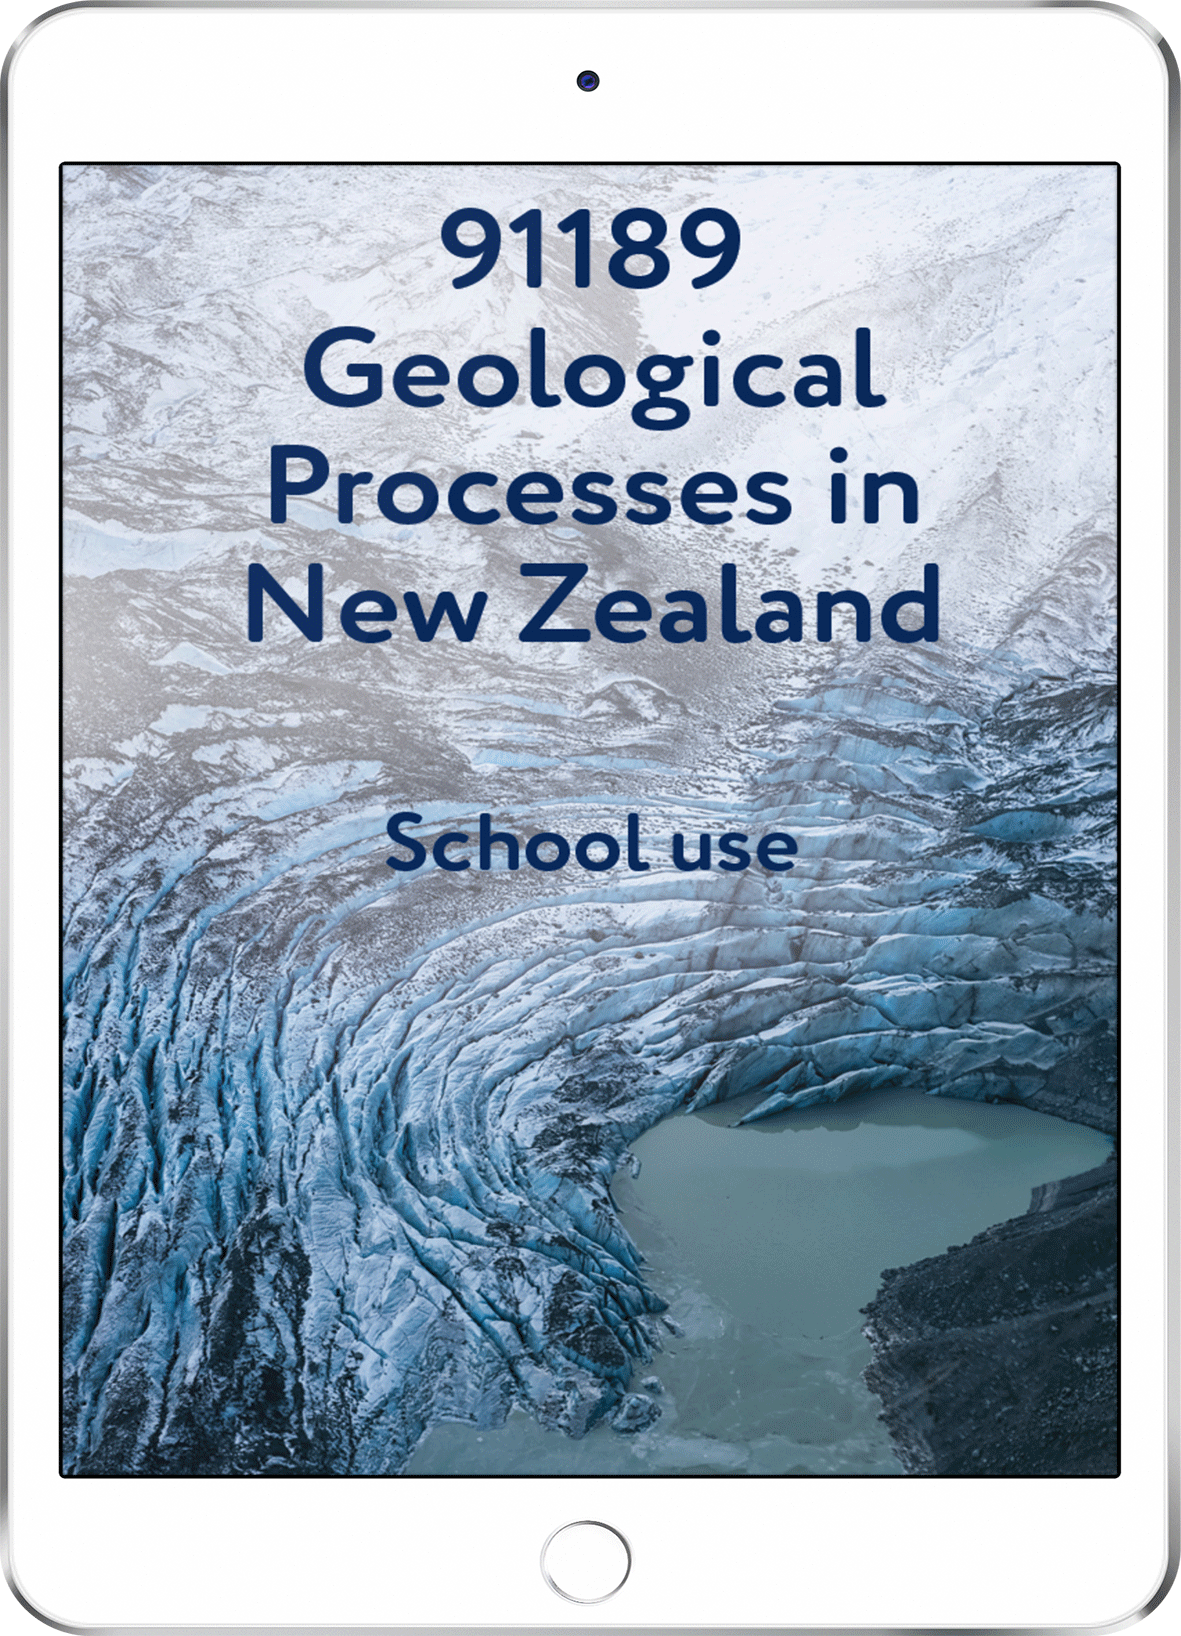 91189 Geological Processes in New Zealand - School Use